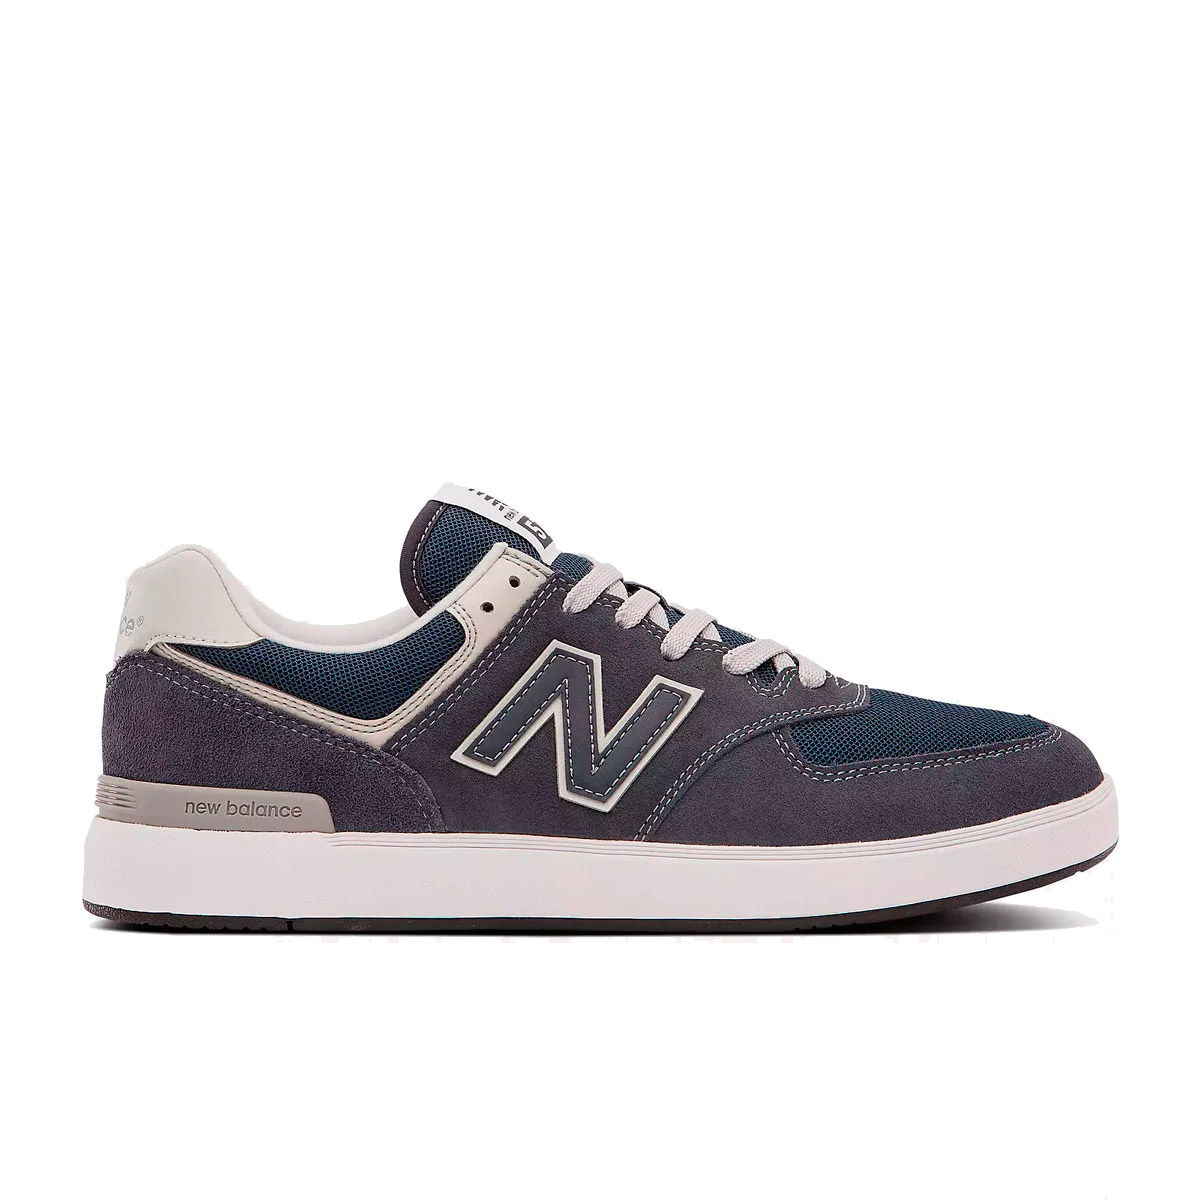 #2 - New Balance AM574 Sneakers